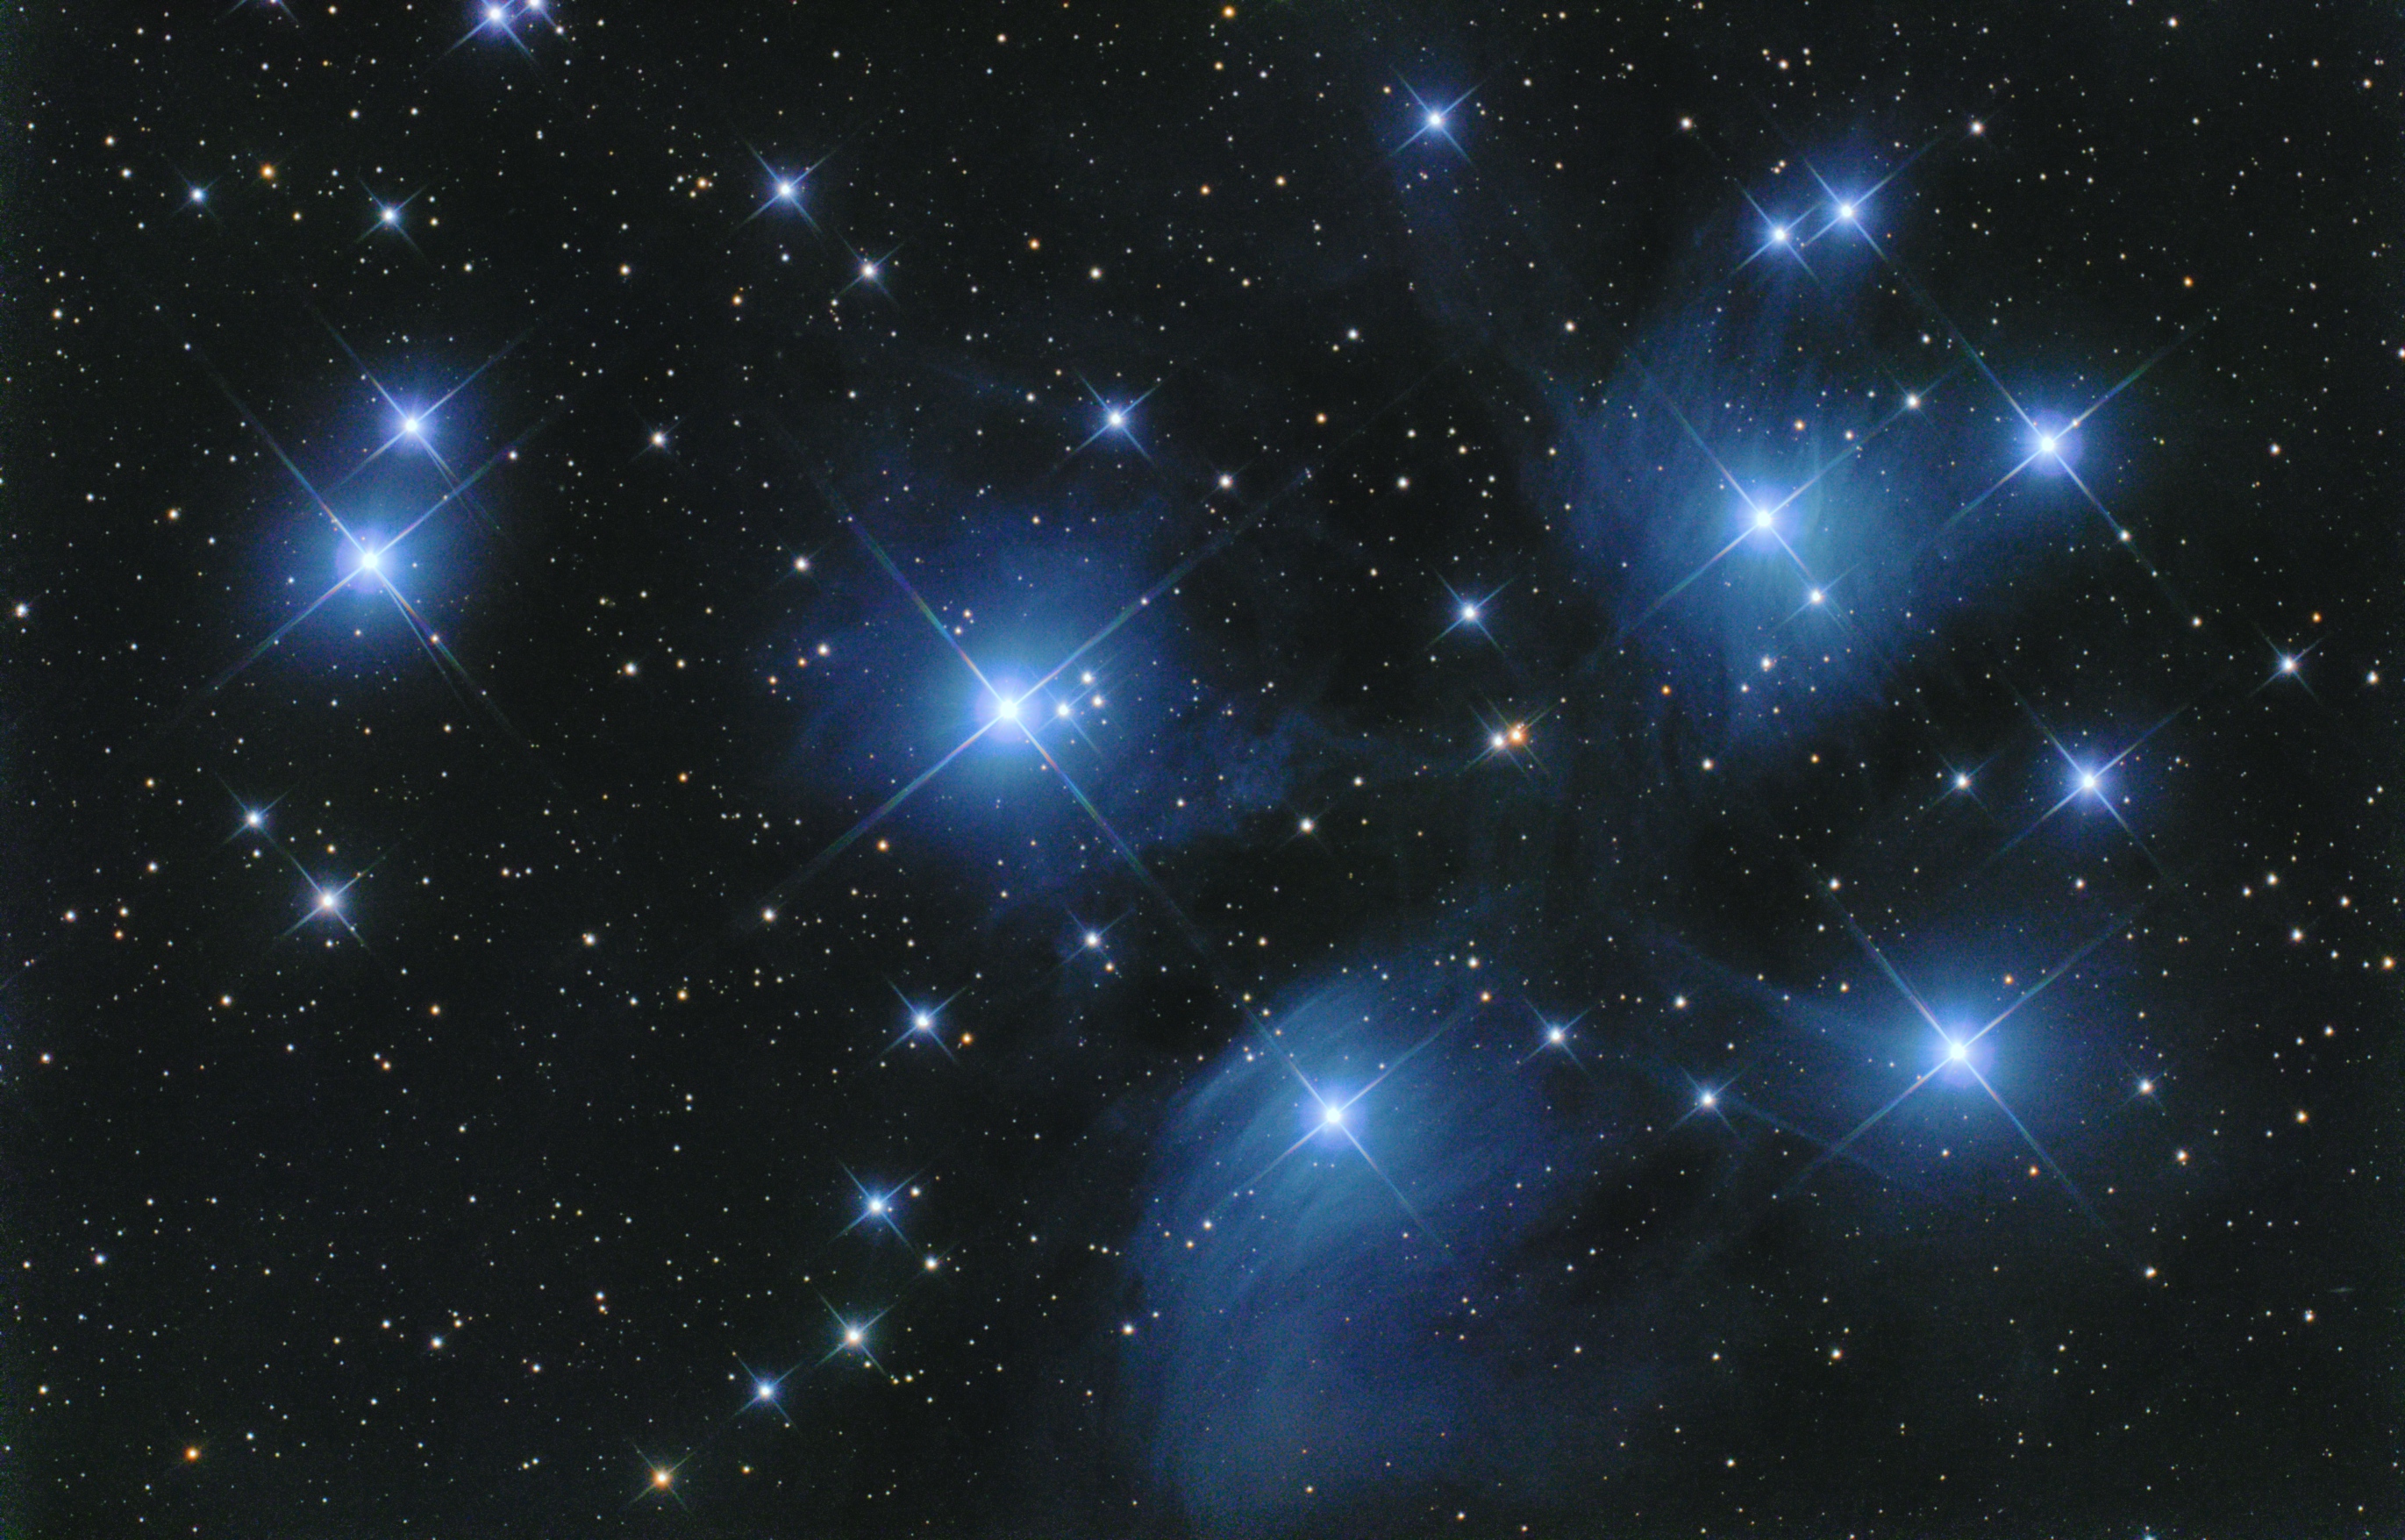 image from Pleiades